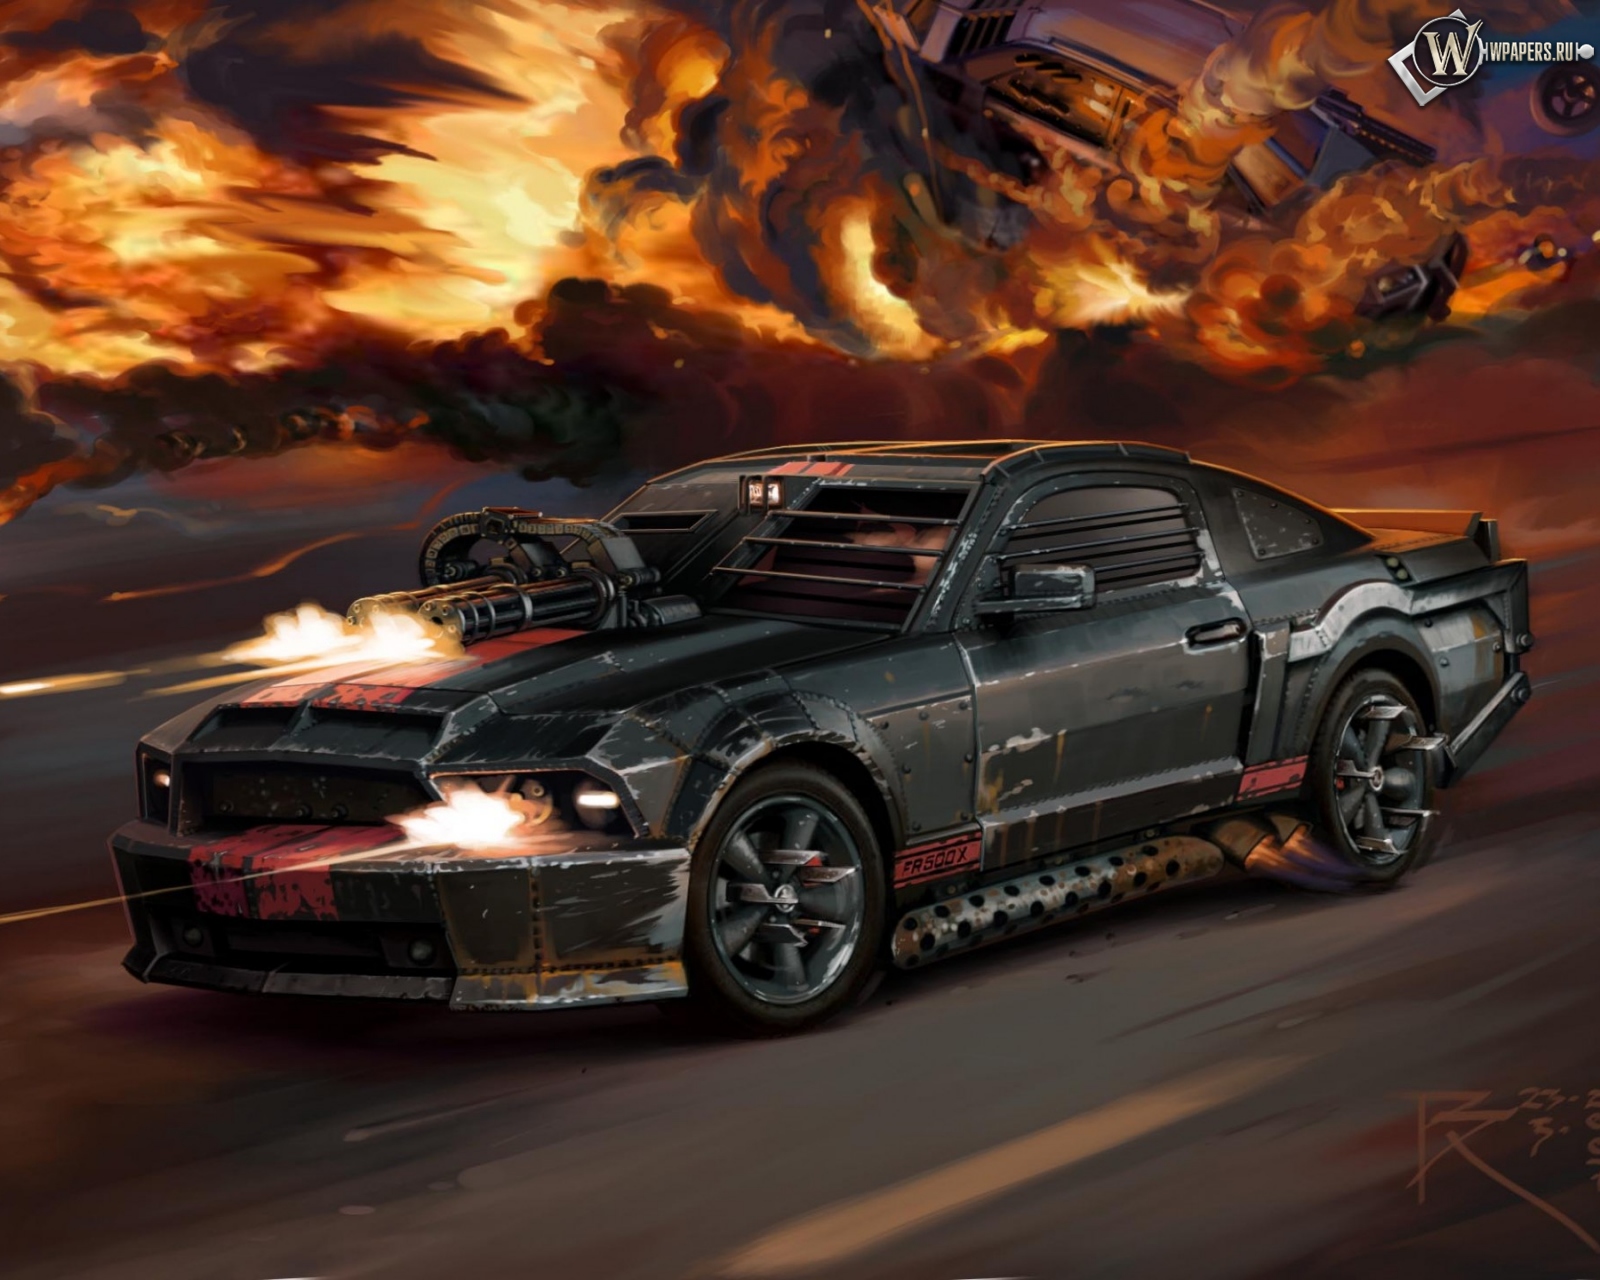 Car ford mustang death race 1600x1280